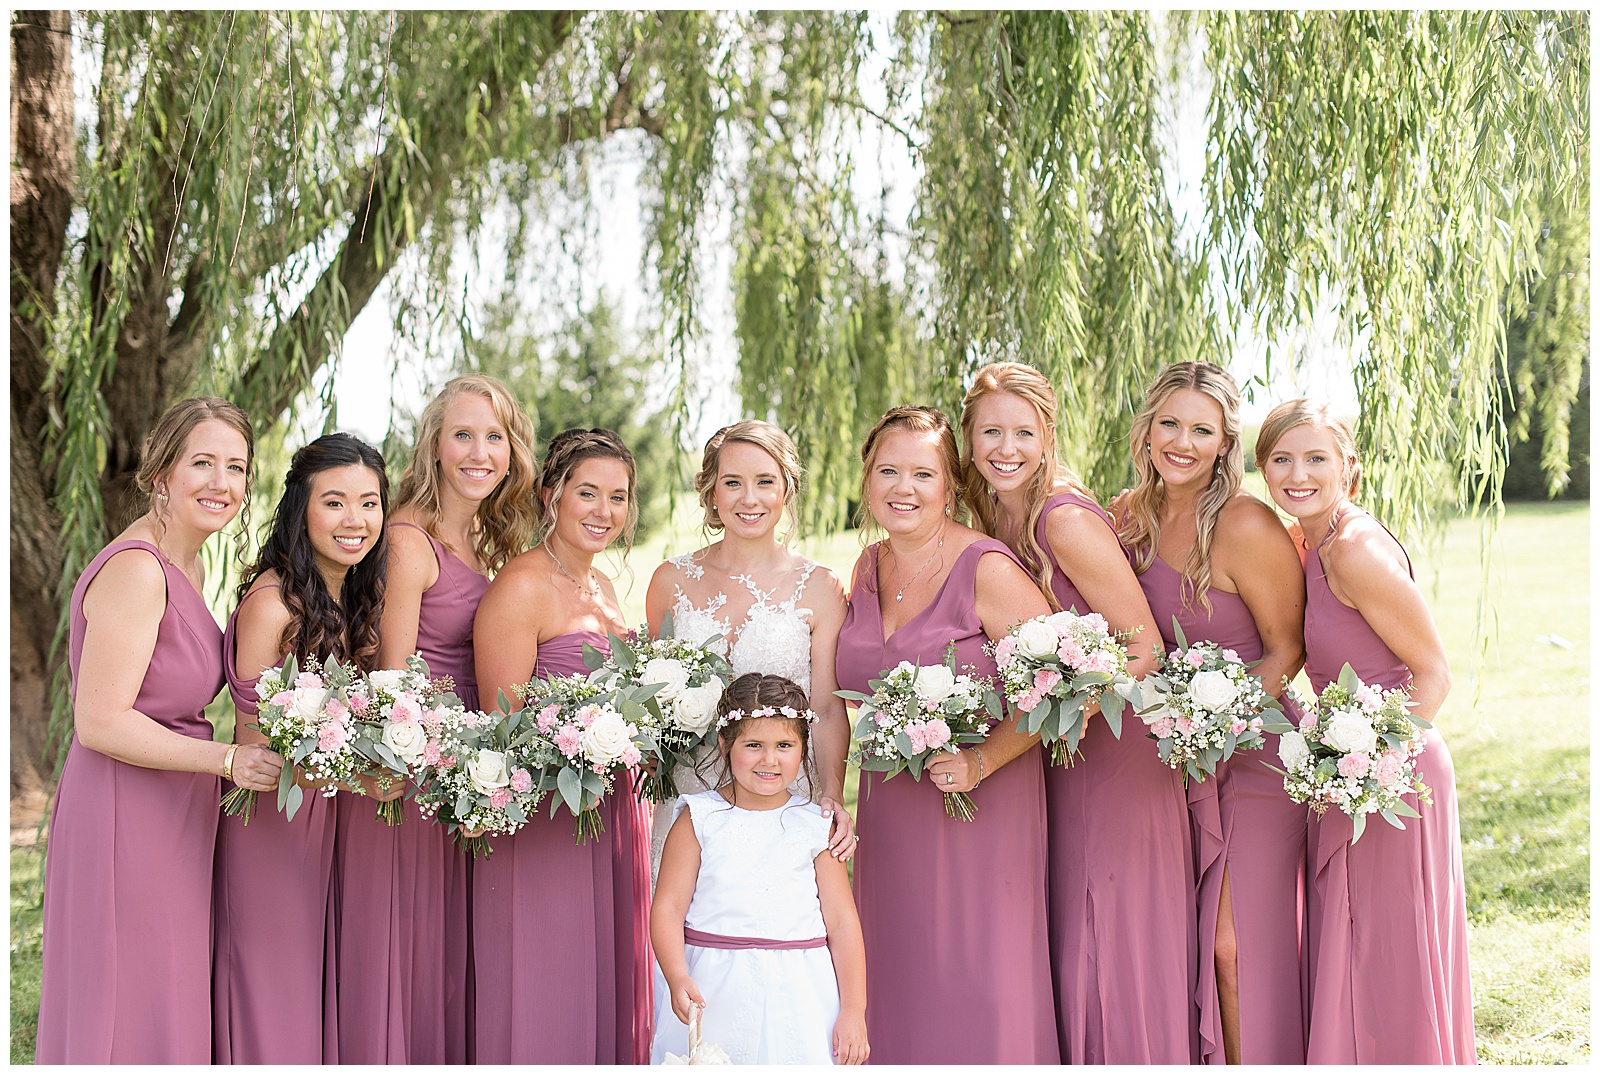 close up photo with the bride is in the center with the flower girl in front of her and four bridesmaids to the right of the bride and four bridesmaids to the left of the bride all facing towards her slightly and smiling at the camera while holding their flower bouquets and standing under the willow tree on a sunny day at Lakefield Weddings in Manheim, PA